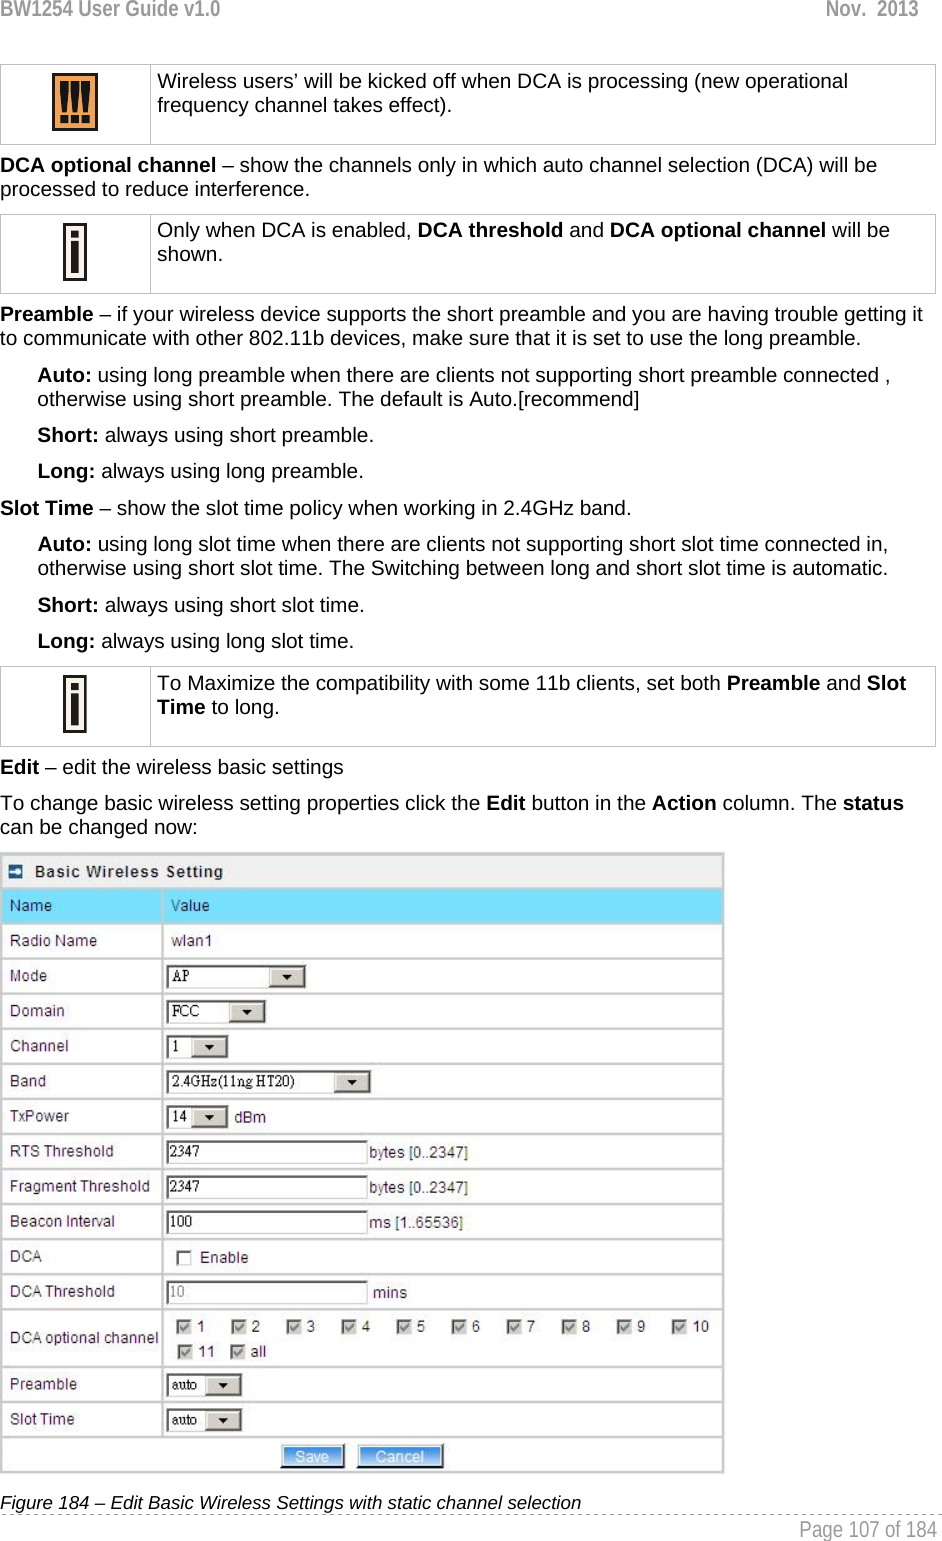 BW1254 User Guide v1.0  Nov.  2013     Page 107 of 184    Wireless users’ will be kicked off when DCA is processing (new operational frequency channel takes effect).  DCA optional channel – show the channels only in which auto channel selection (DCA) will be processed to reduce interference.  Only when DCA is enabled, DCA threshold and DCA optional channel will be shown.  Preamble – if your wireless device supports the short preamble and you are having trouble getting it to communicate with other 802.11b devices, make sure that it is set to use the long preamble. Auto: using long preamble when there are clients not supporting short preamble connected , otherwise using short preamble. The default is Auto.[recommend] Short: always using short preamble. Long: always using long preamble. Slot Time – show the slot time policy when working in 2.4GHz band. Auto: using long slot time when there are clients not supporting short slot time connected in, otherwise using short slot time. The Switching between long and short slot time is automatic. Short: always using short slot time. Long: always using long slot time.  To Maximize the compatibility with some 11b clients, set both Preamble and Slot Time to long. Edit – edit the wireless basic settings To change basic wireless setting properties click the Edit button in the Action column. The status can be changed now:  Figure 184 – Edit Basic Wireless Settings with static channel selection 